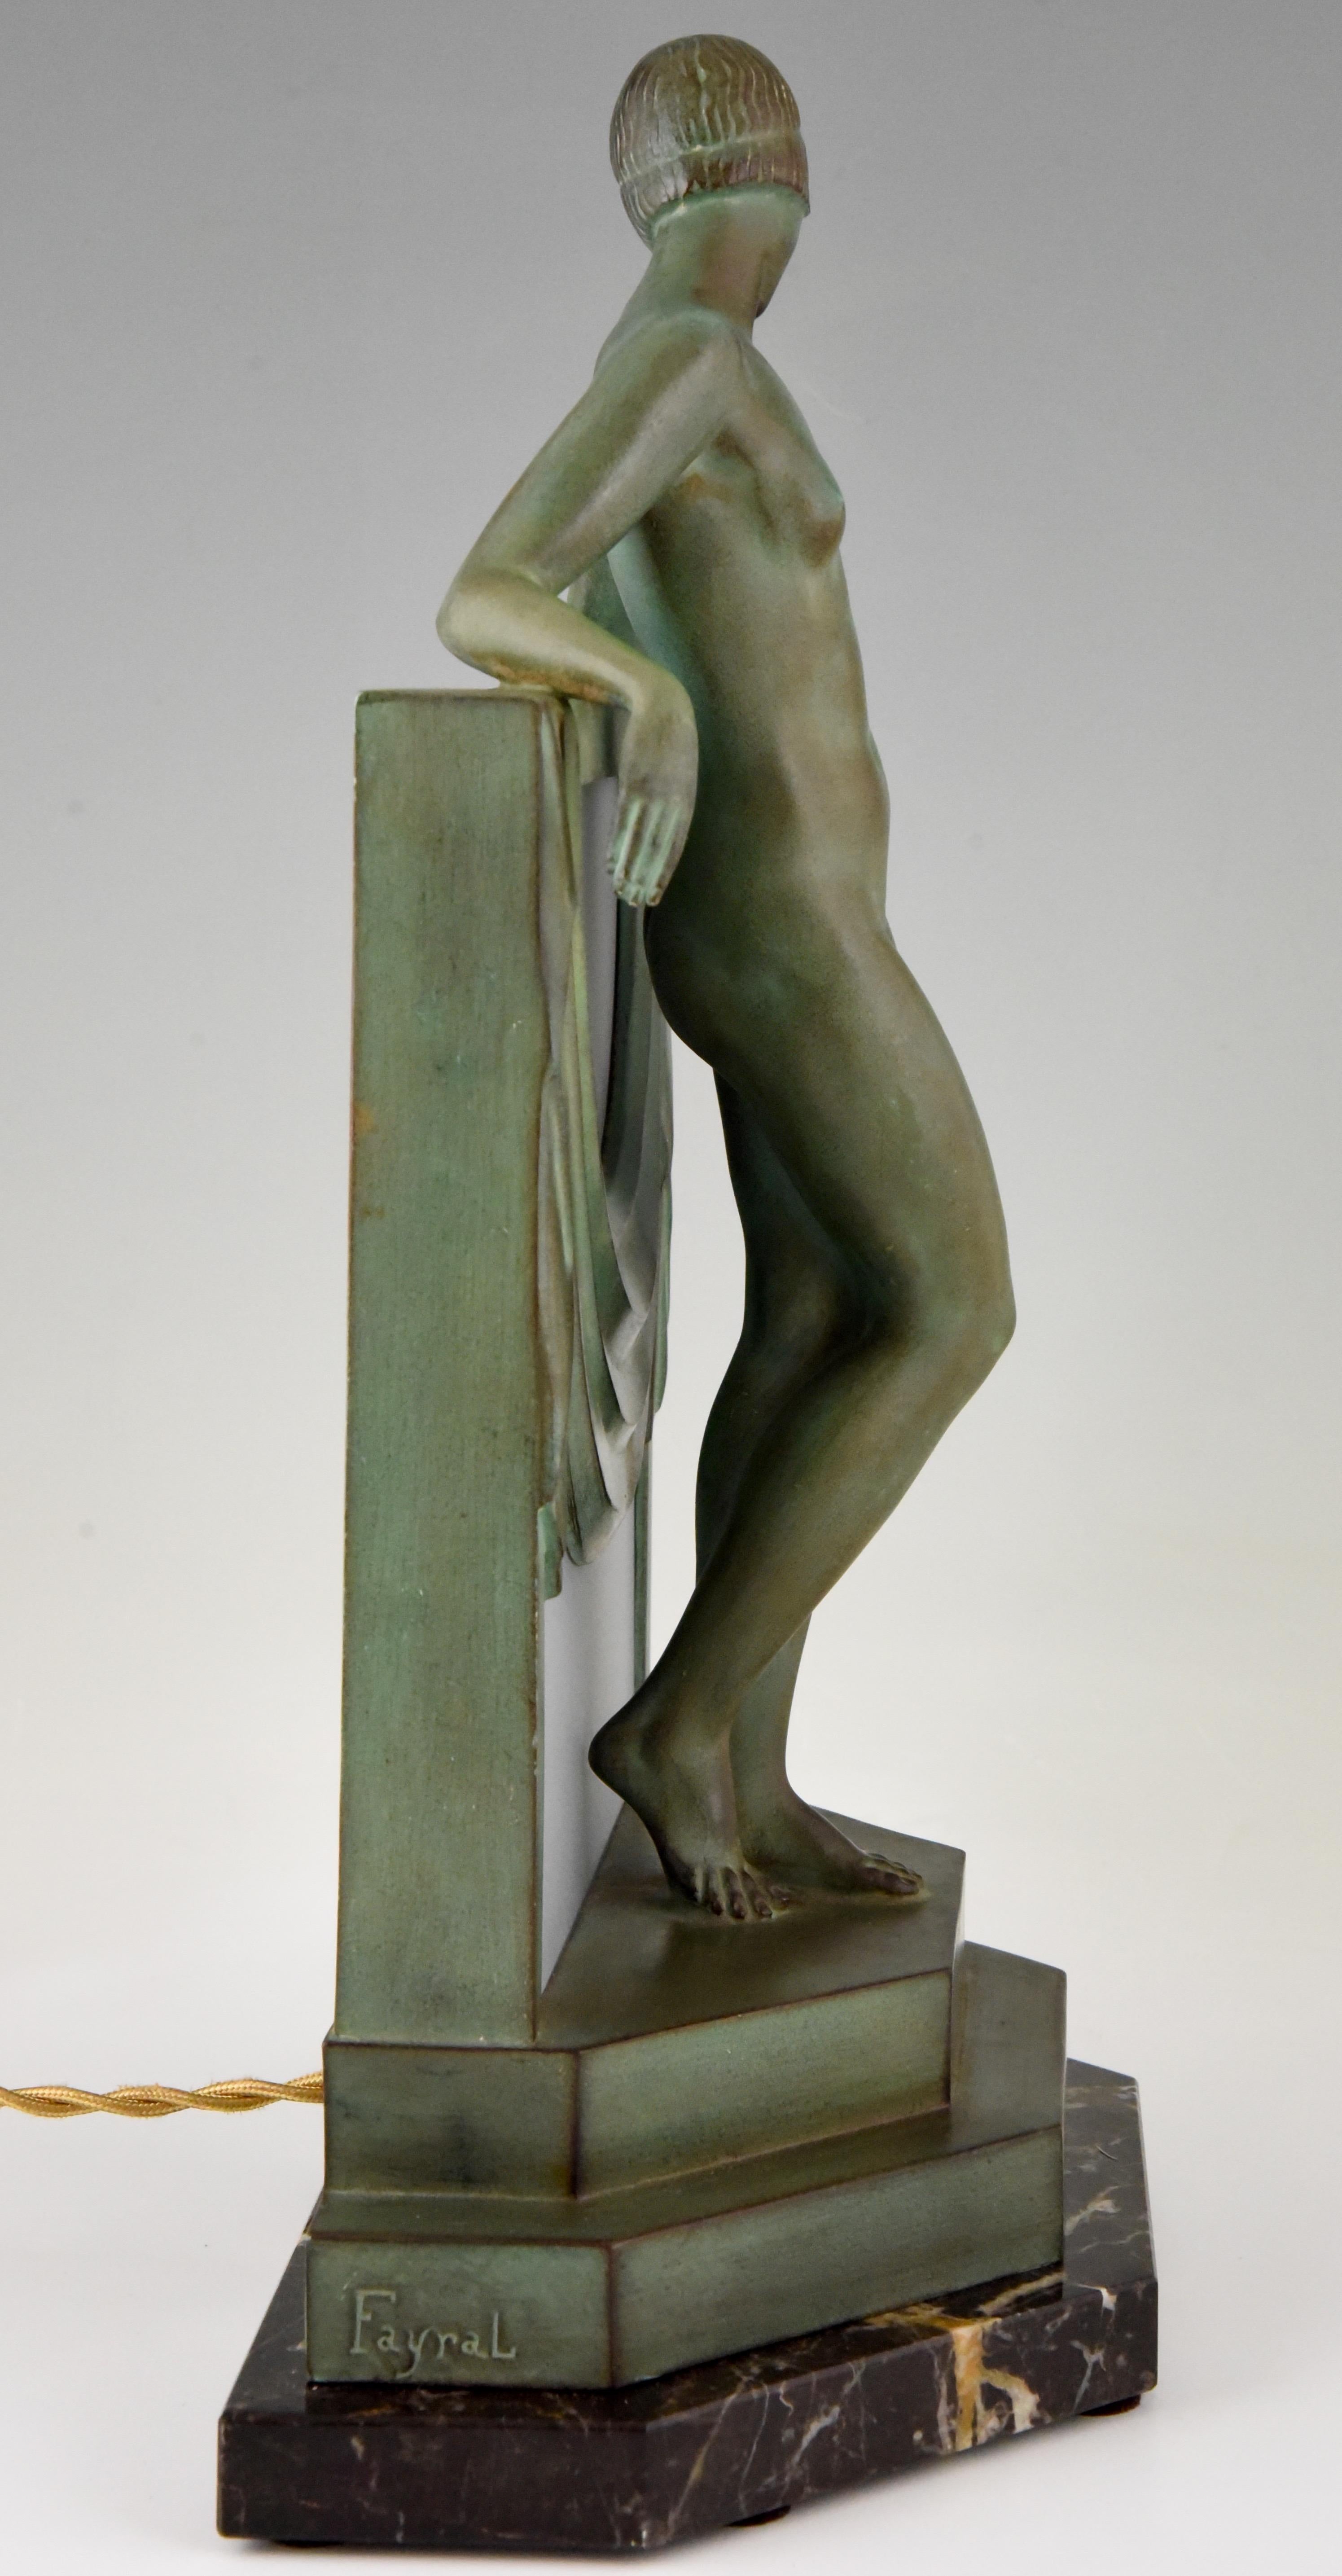 Art Deco Lamp Sculpture Nude with Scarf Fayral Max Le Verrier 1930 France 1